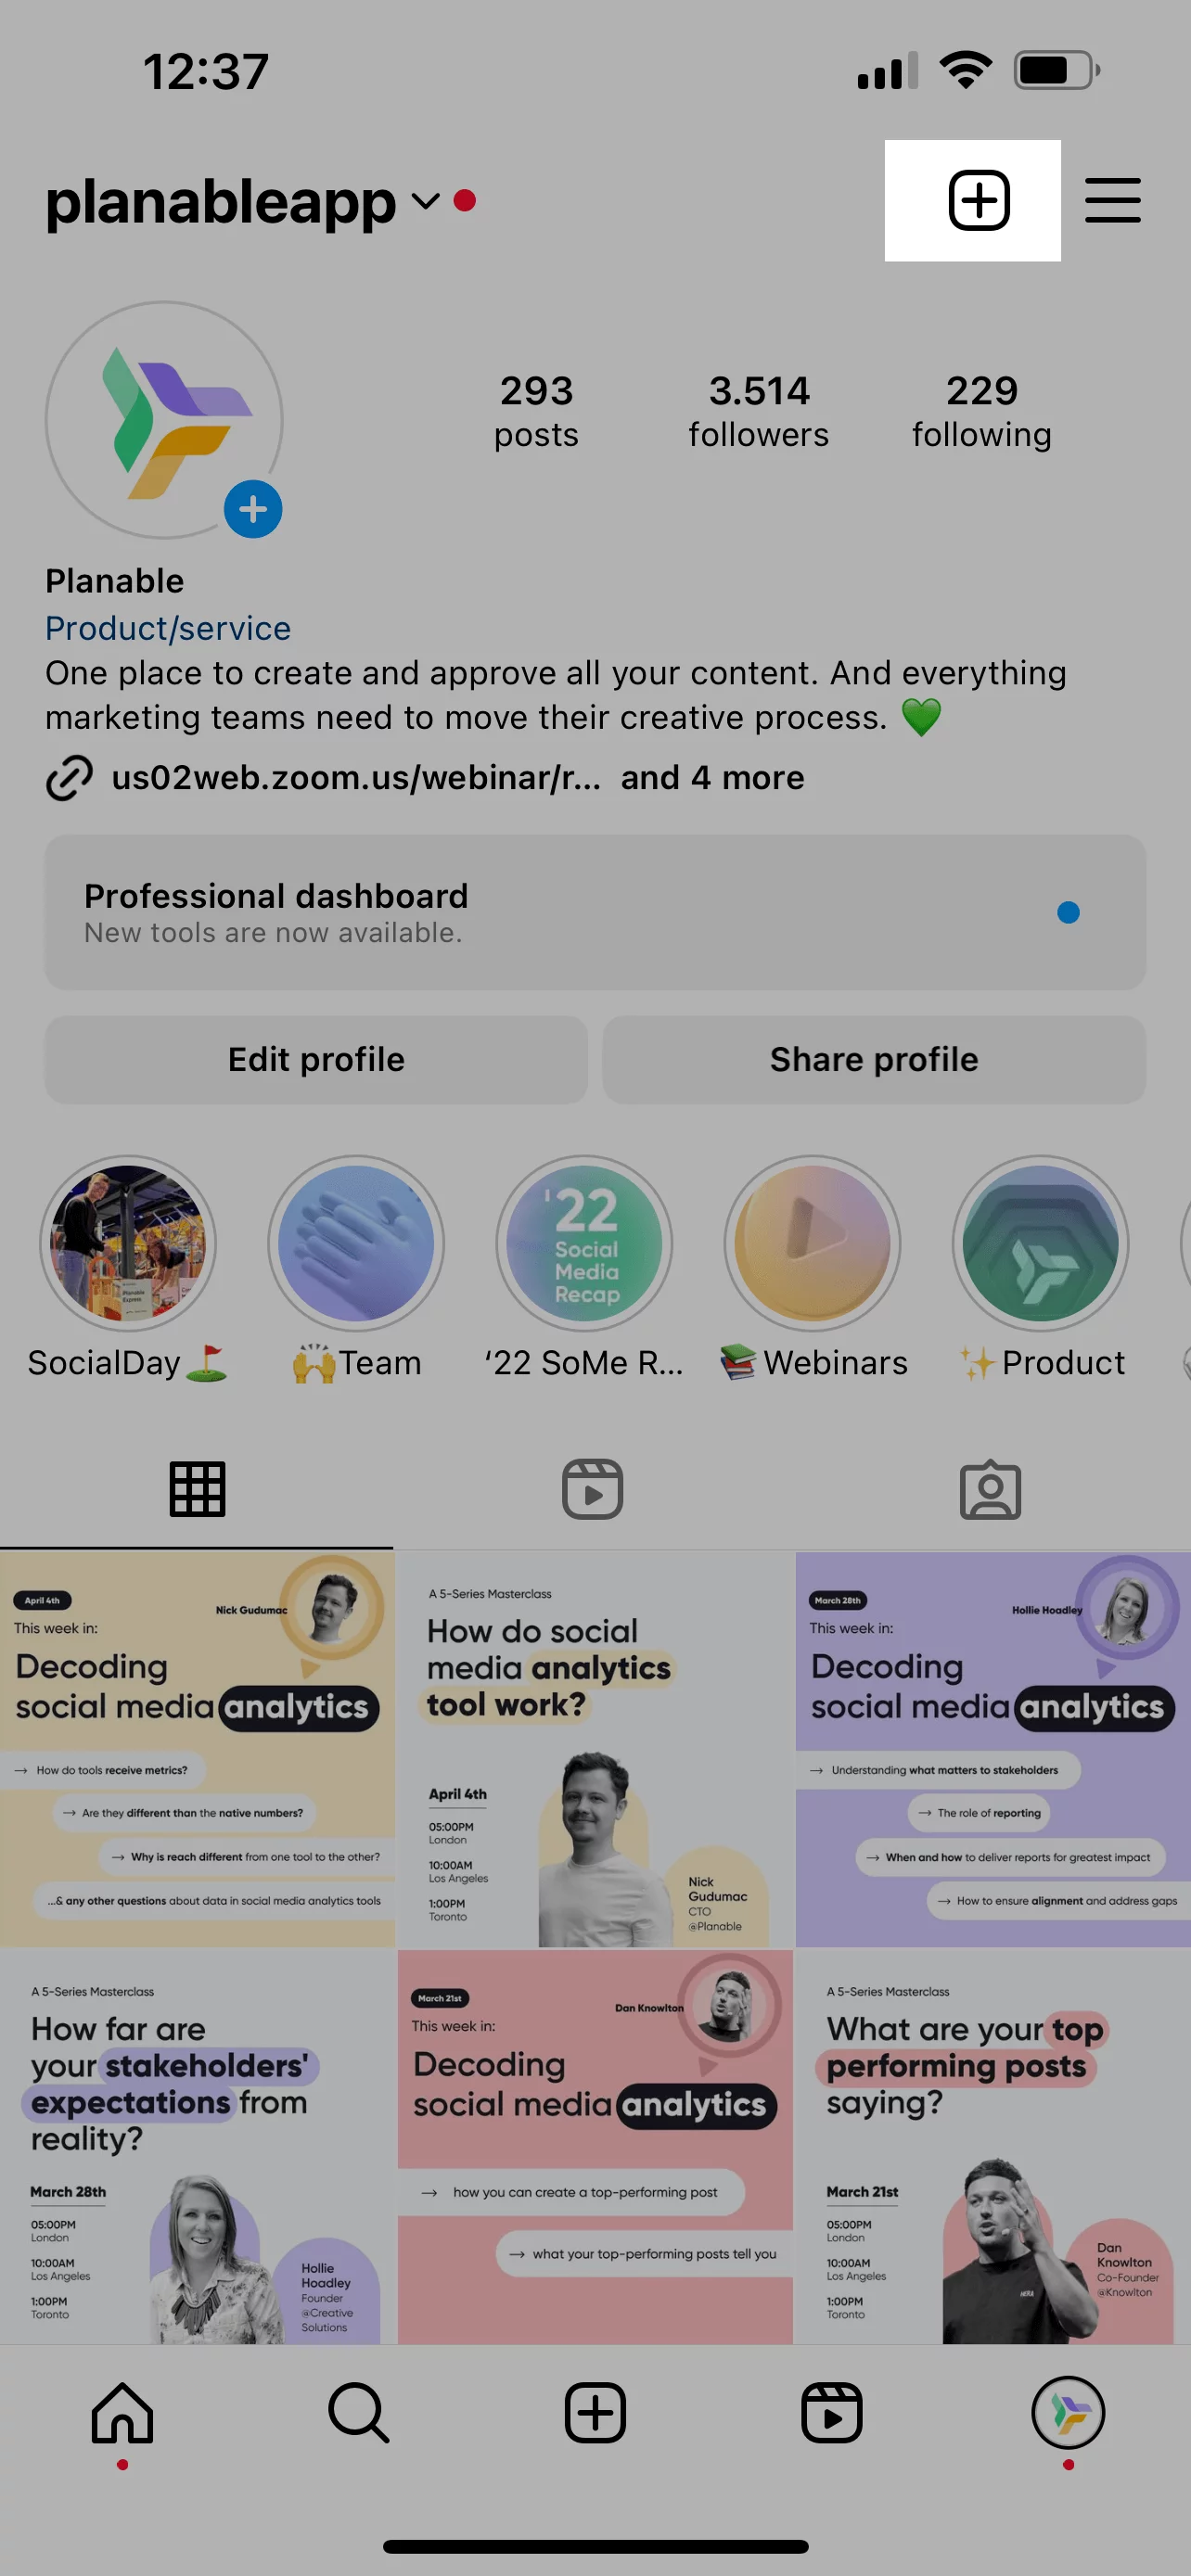 In Planable's Instagram account, you can initiate creating a new post by clicking on the prominently highlighted + icon